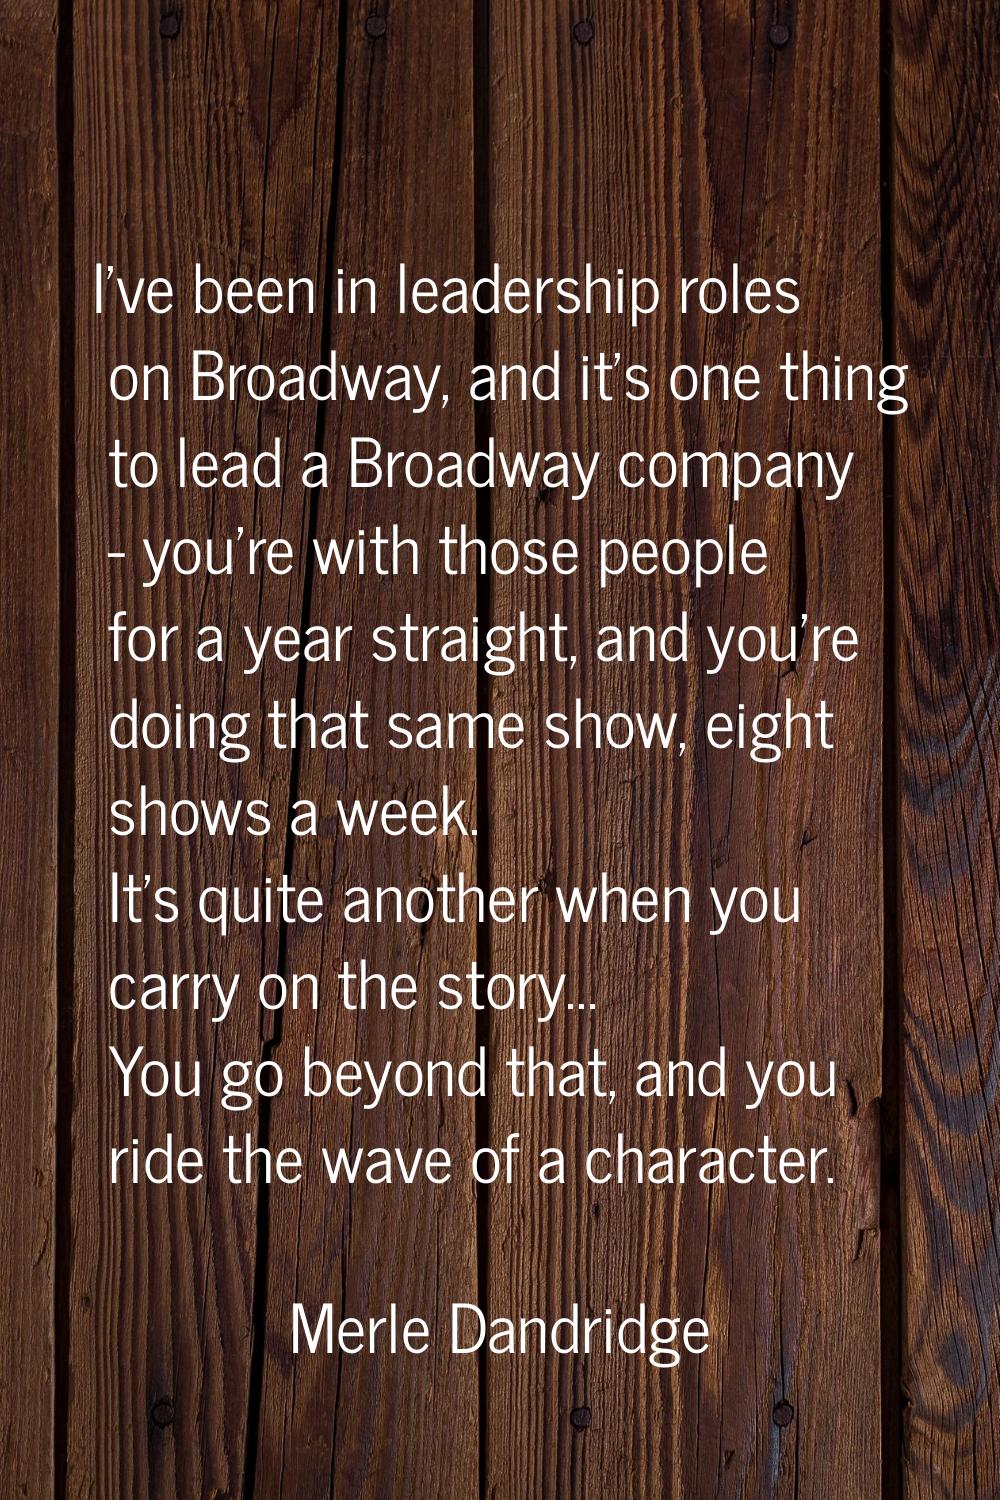 I've been in leadership roles on Broadway, and it's one thing to lead a Broadway company - you're w